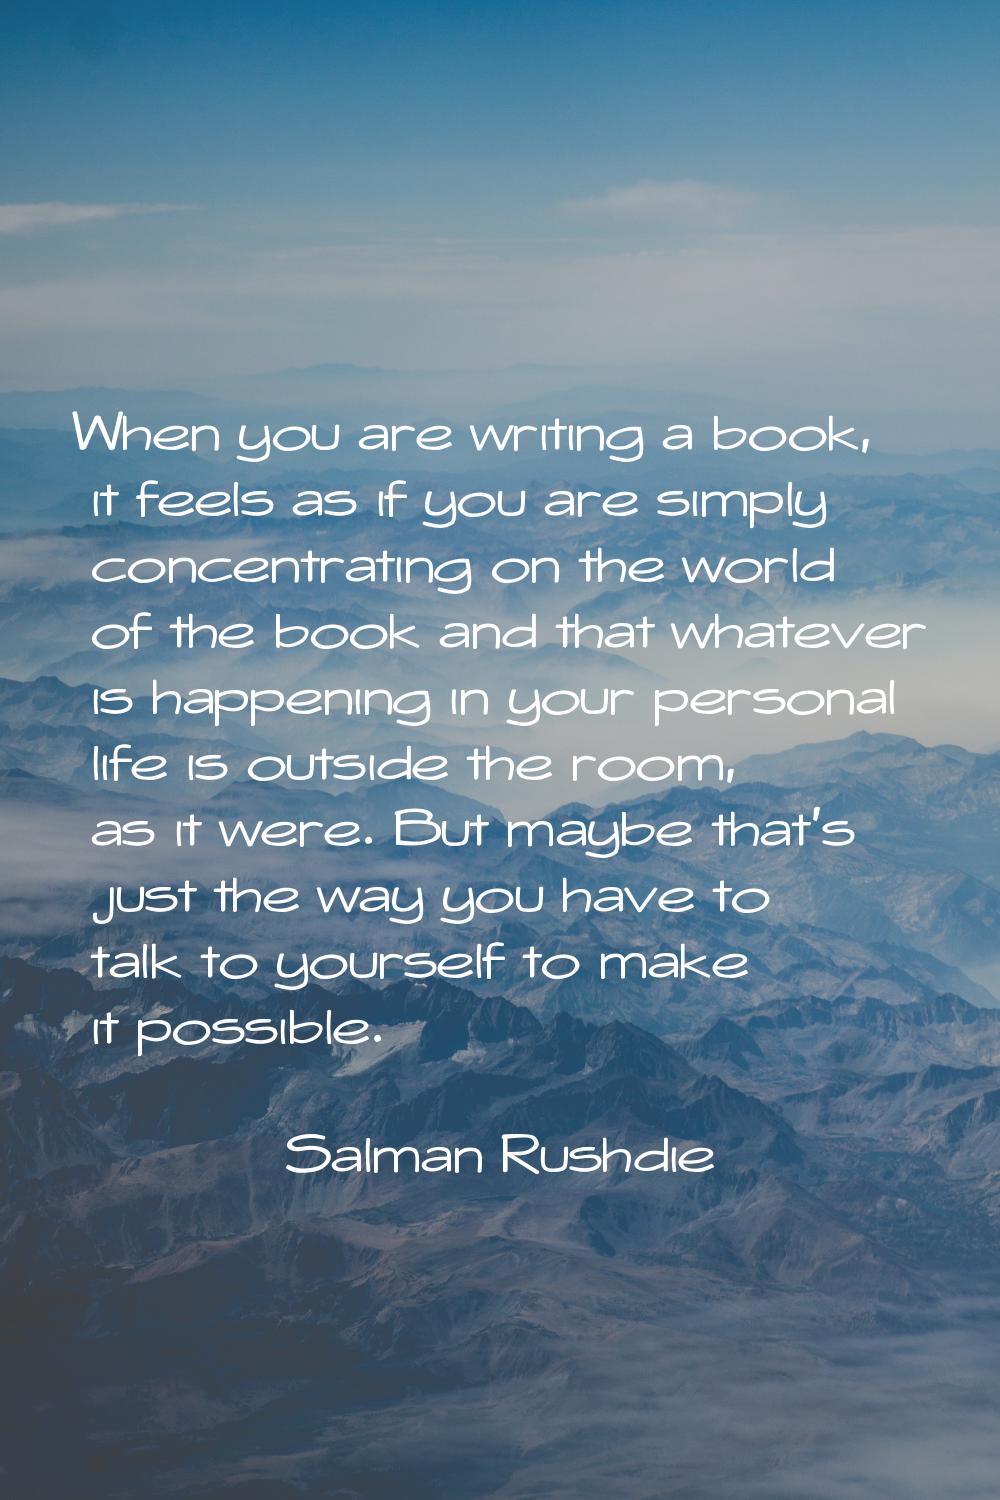 When you are writing a book, it feels as if you are simply concentrating on the world of the book a